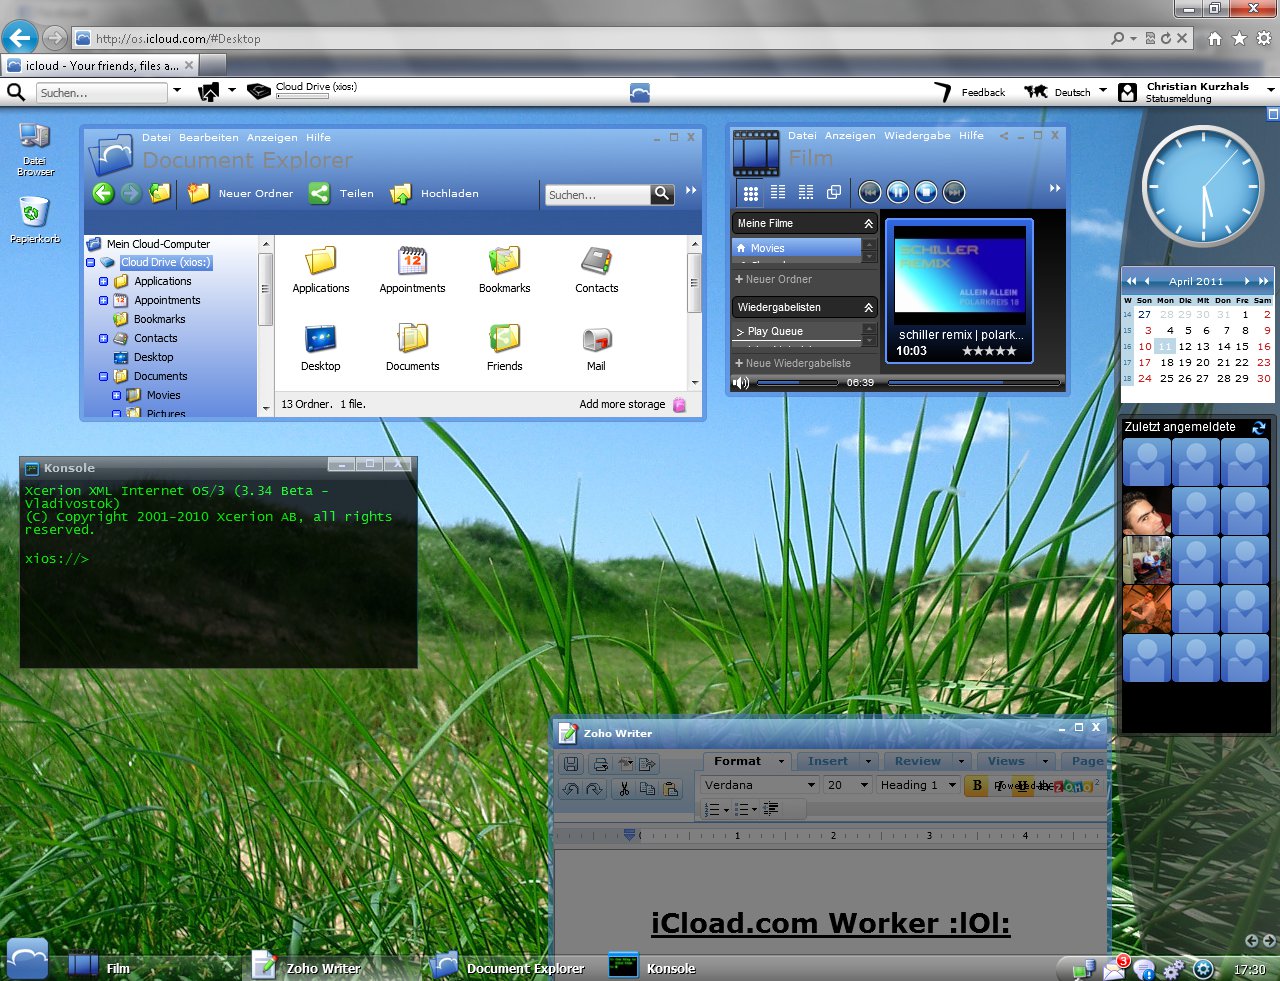 CloudMe for Mac OS X 1.6.1